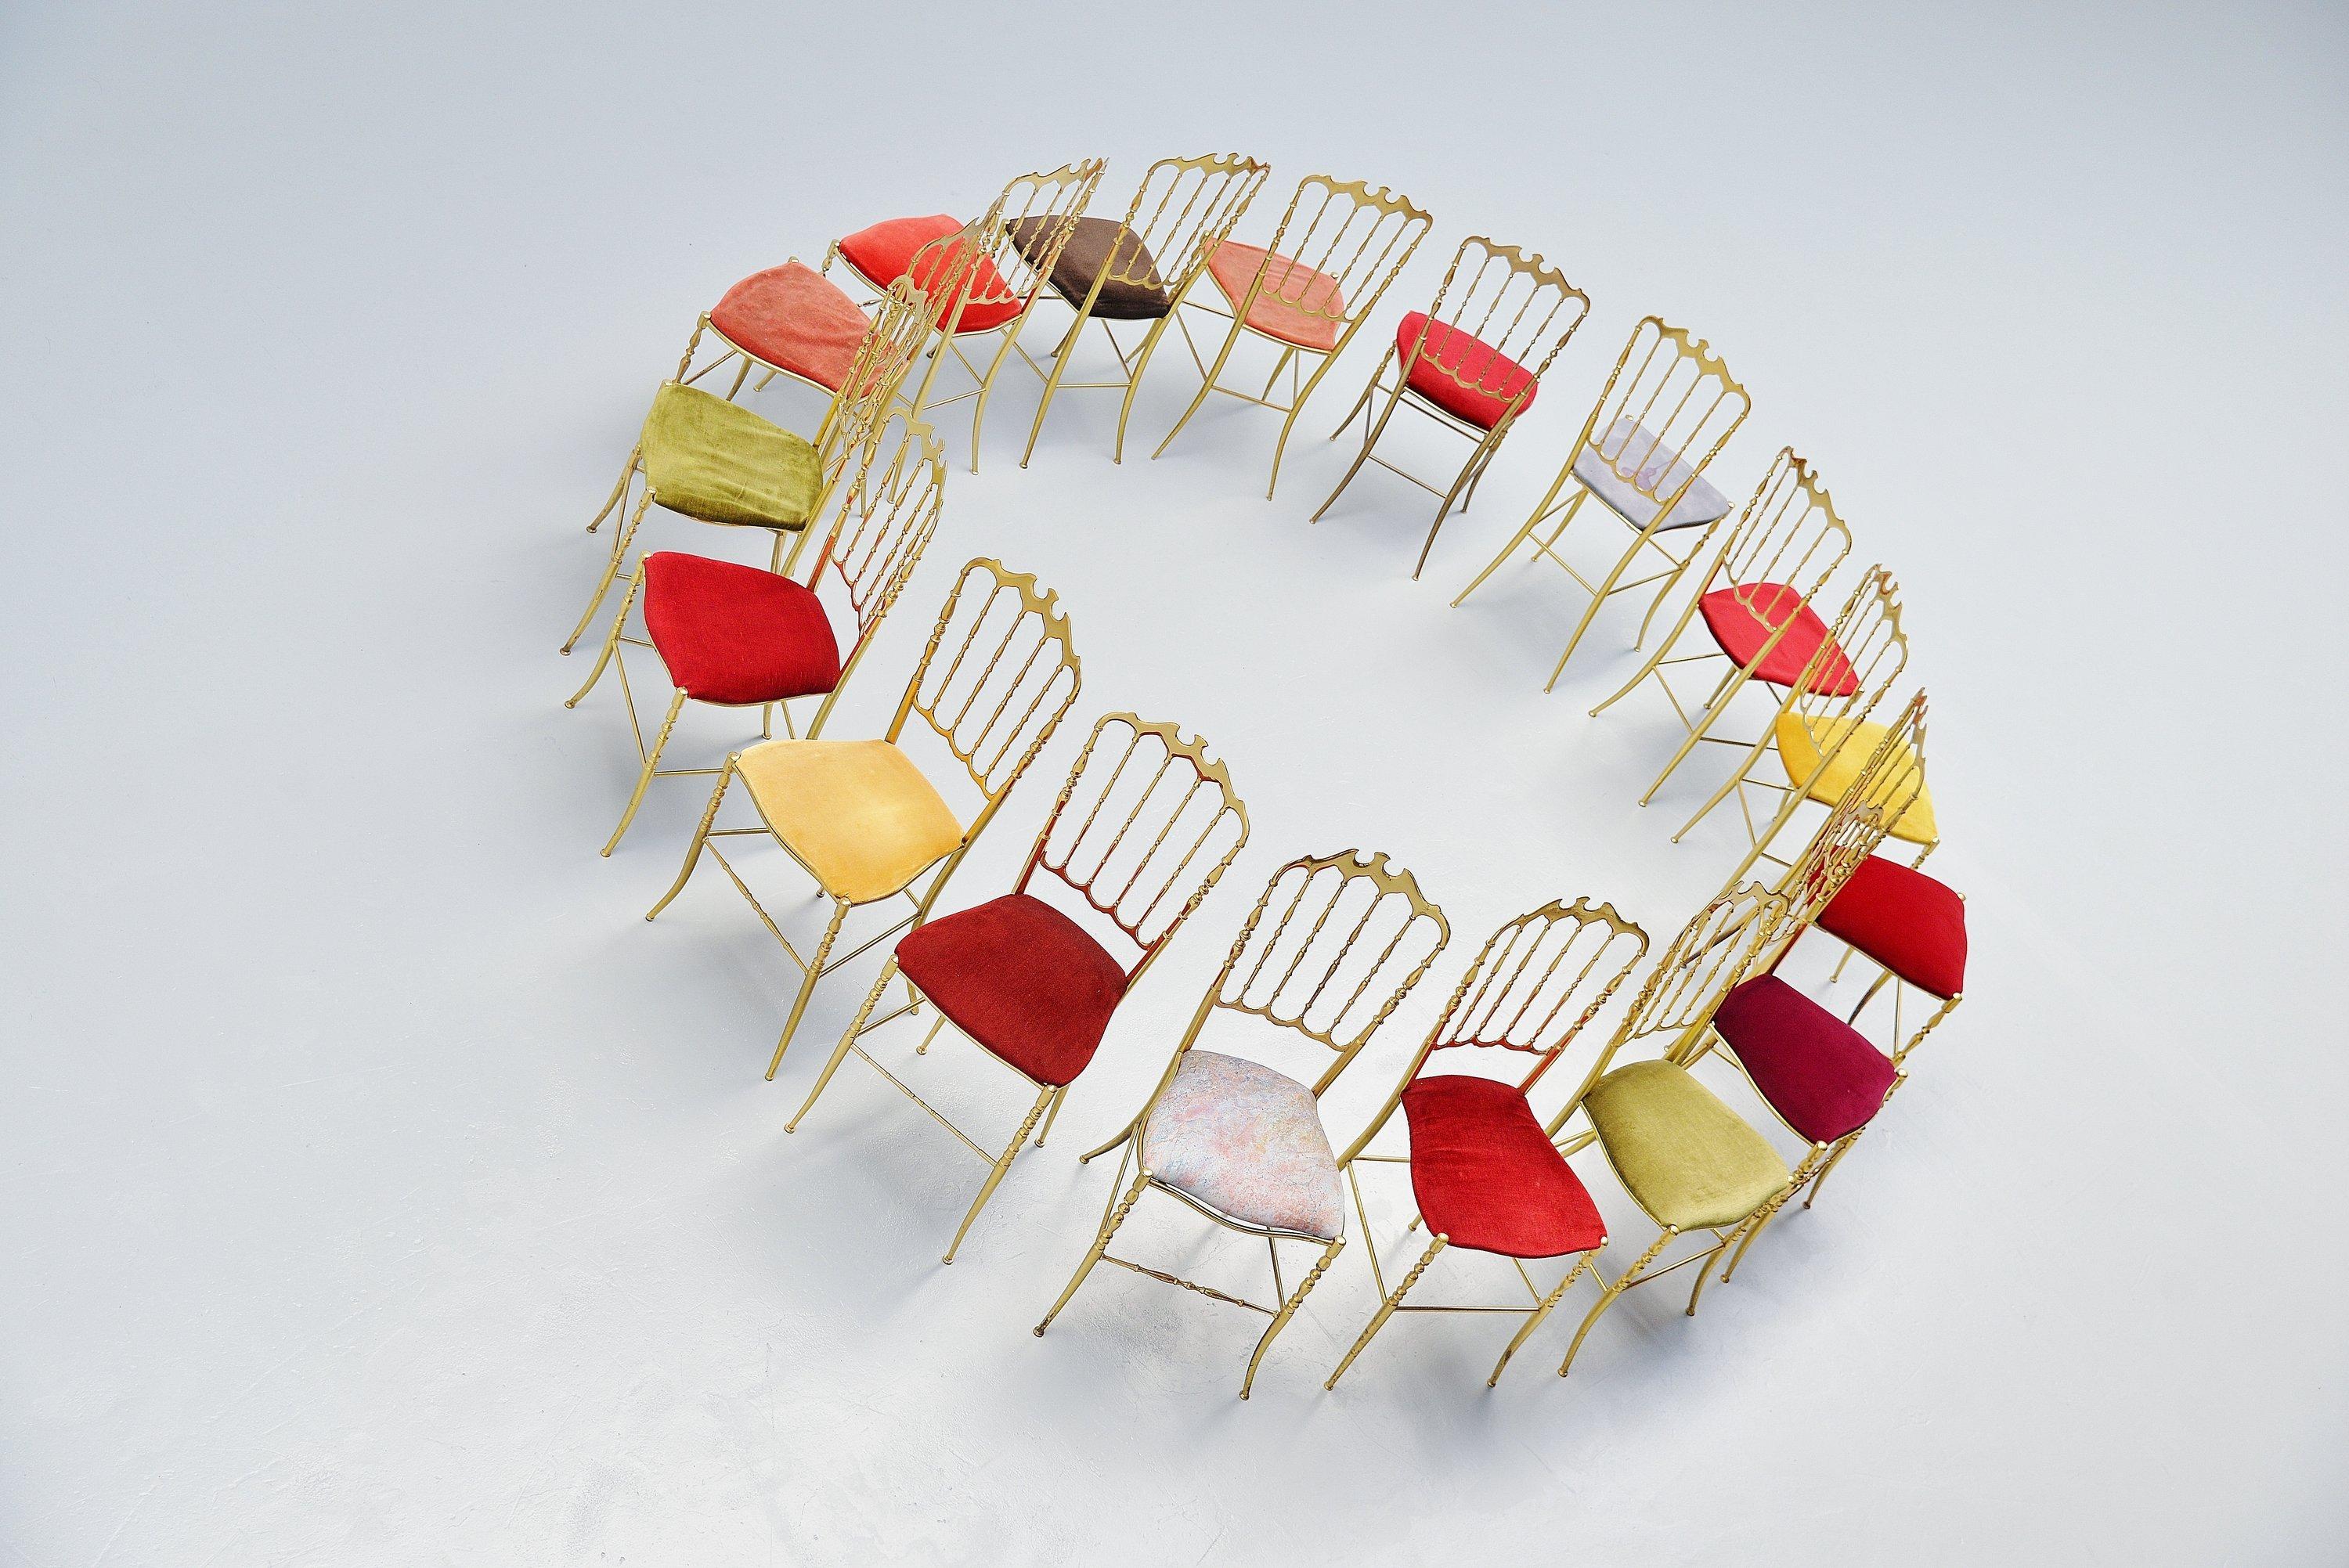 Fantastic collection of 17 Chiavari dining chairs designed by Giuseppe Gaetano Descalzi, Italy 1960s. These chairs have solid brass frames and different kinds of upholstery. This big collection of chairs is very nice and colorful together. All